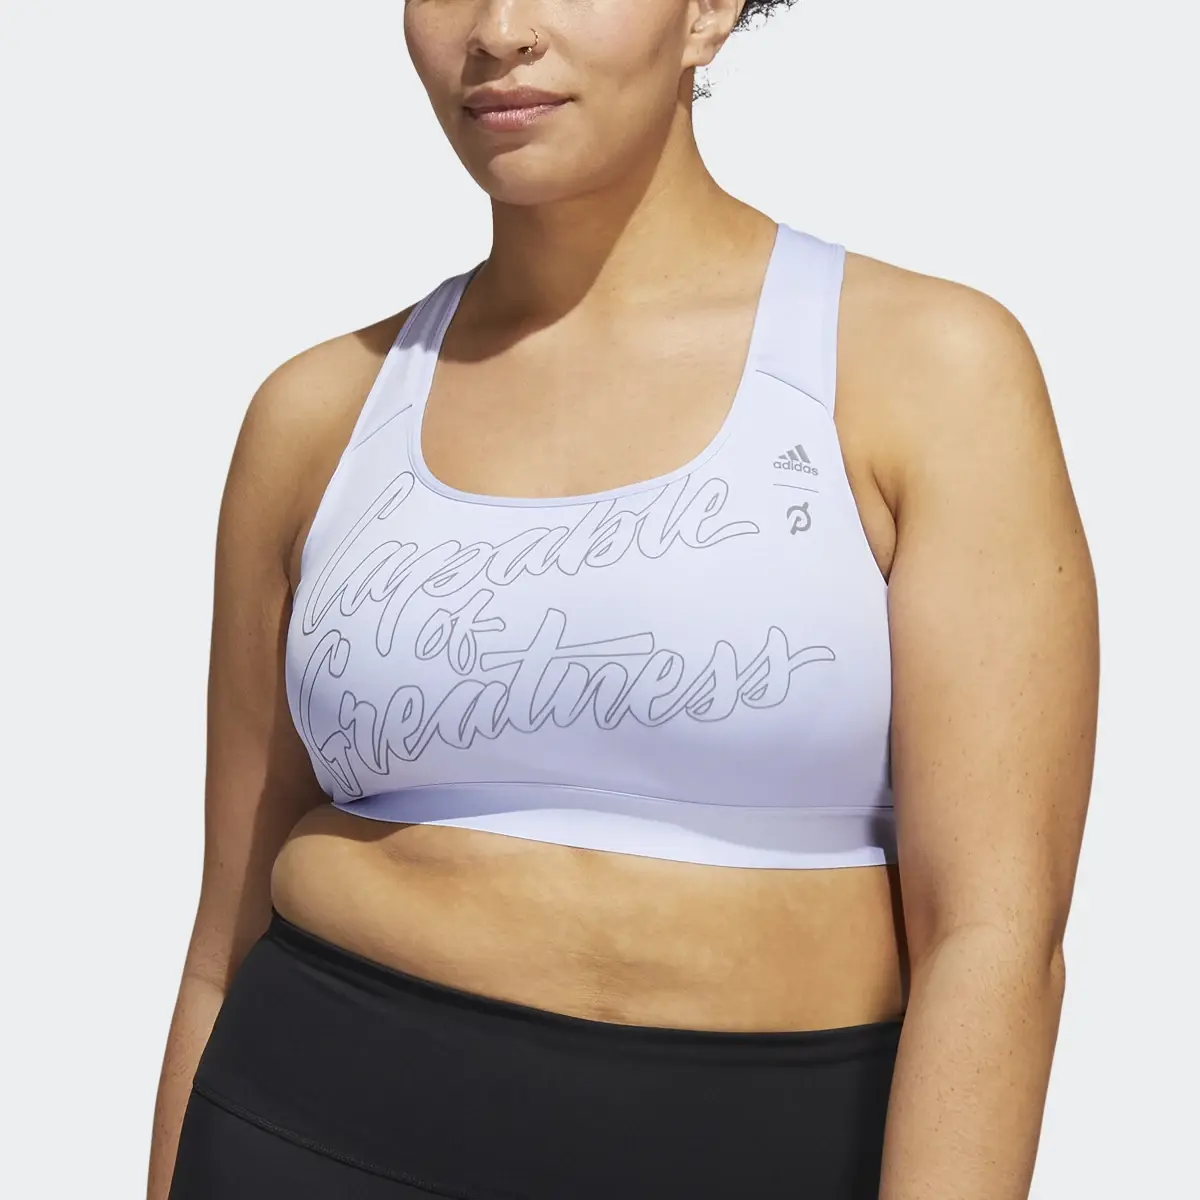 Adidas Capable of Greatness Bra (Plus Size). 1